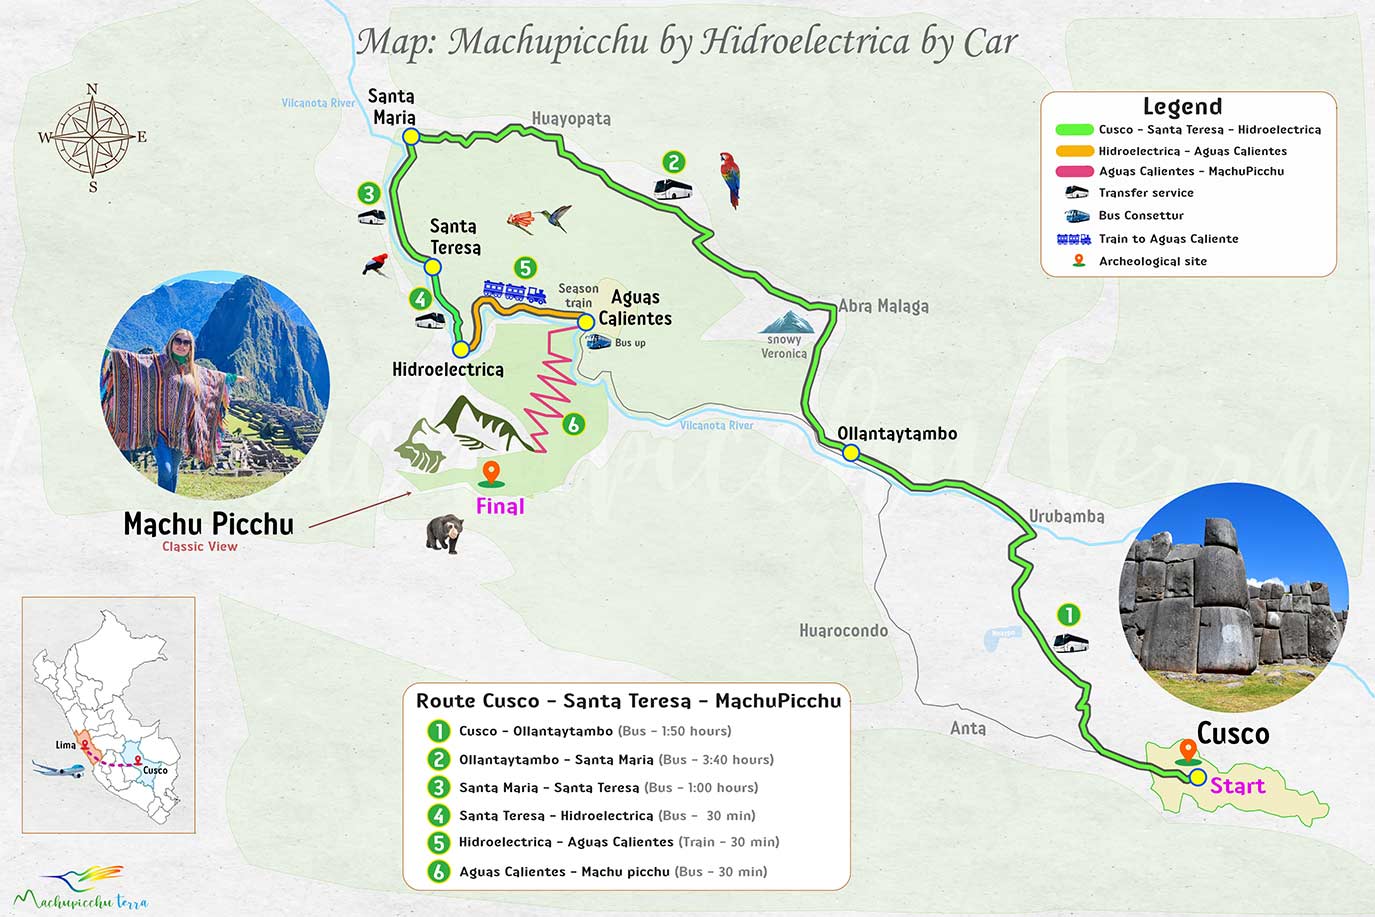 Route to Machu Picchu by Car